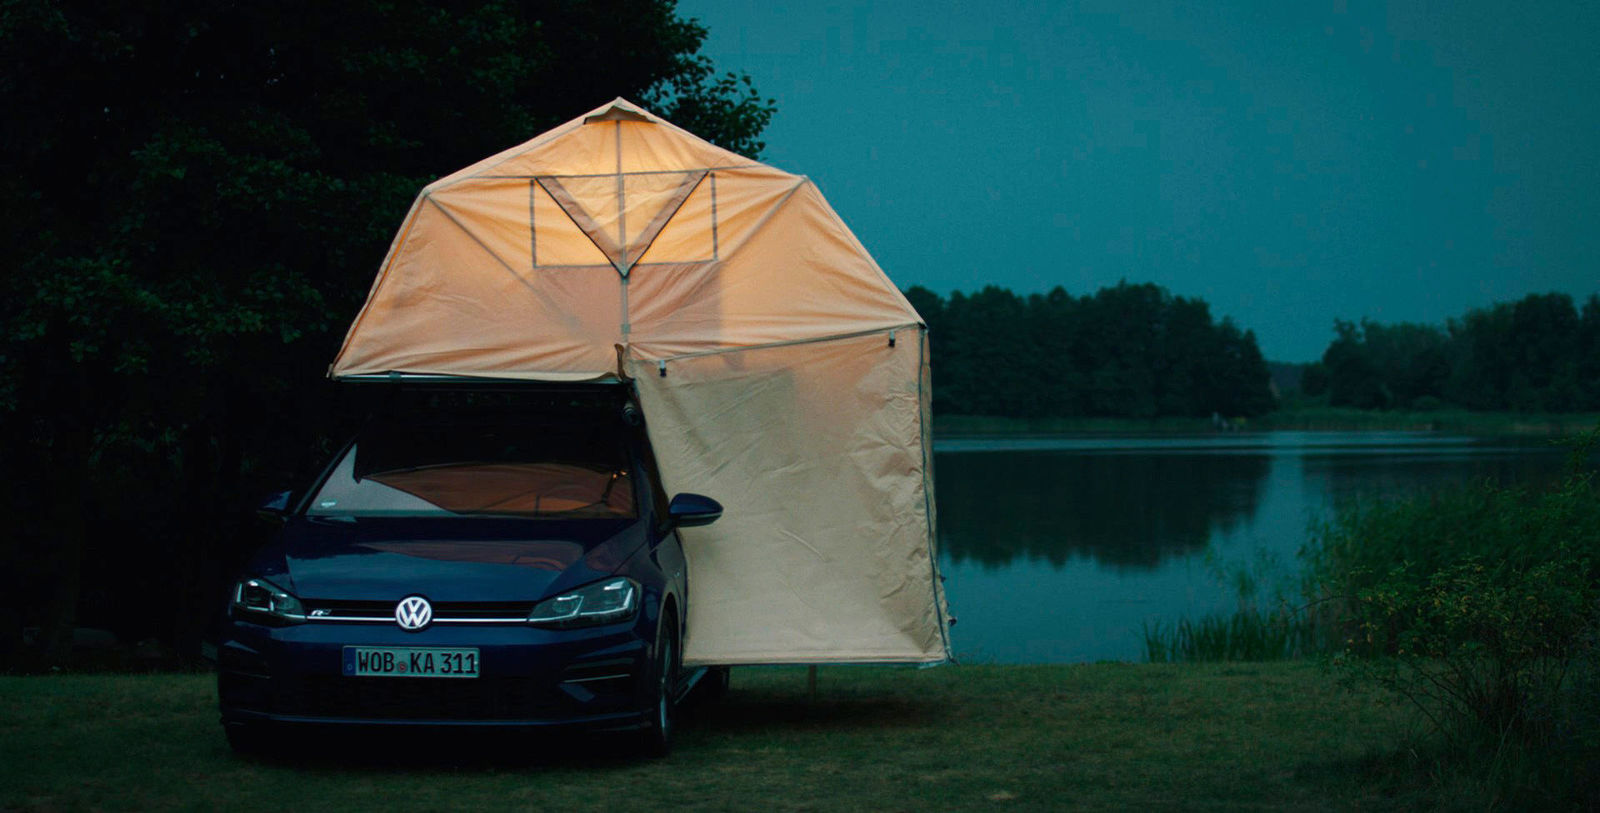 Story "Camping with the Golf"